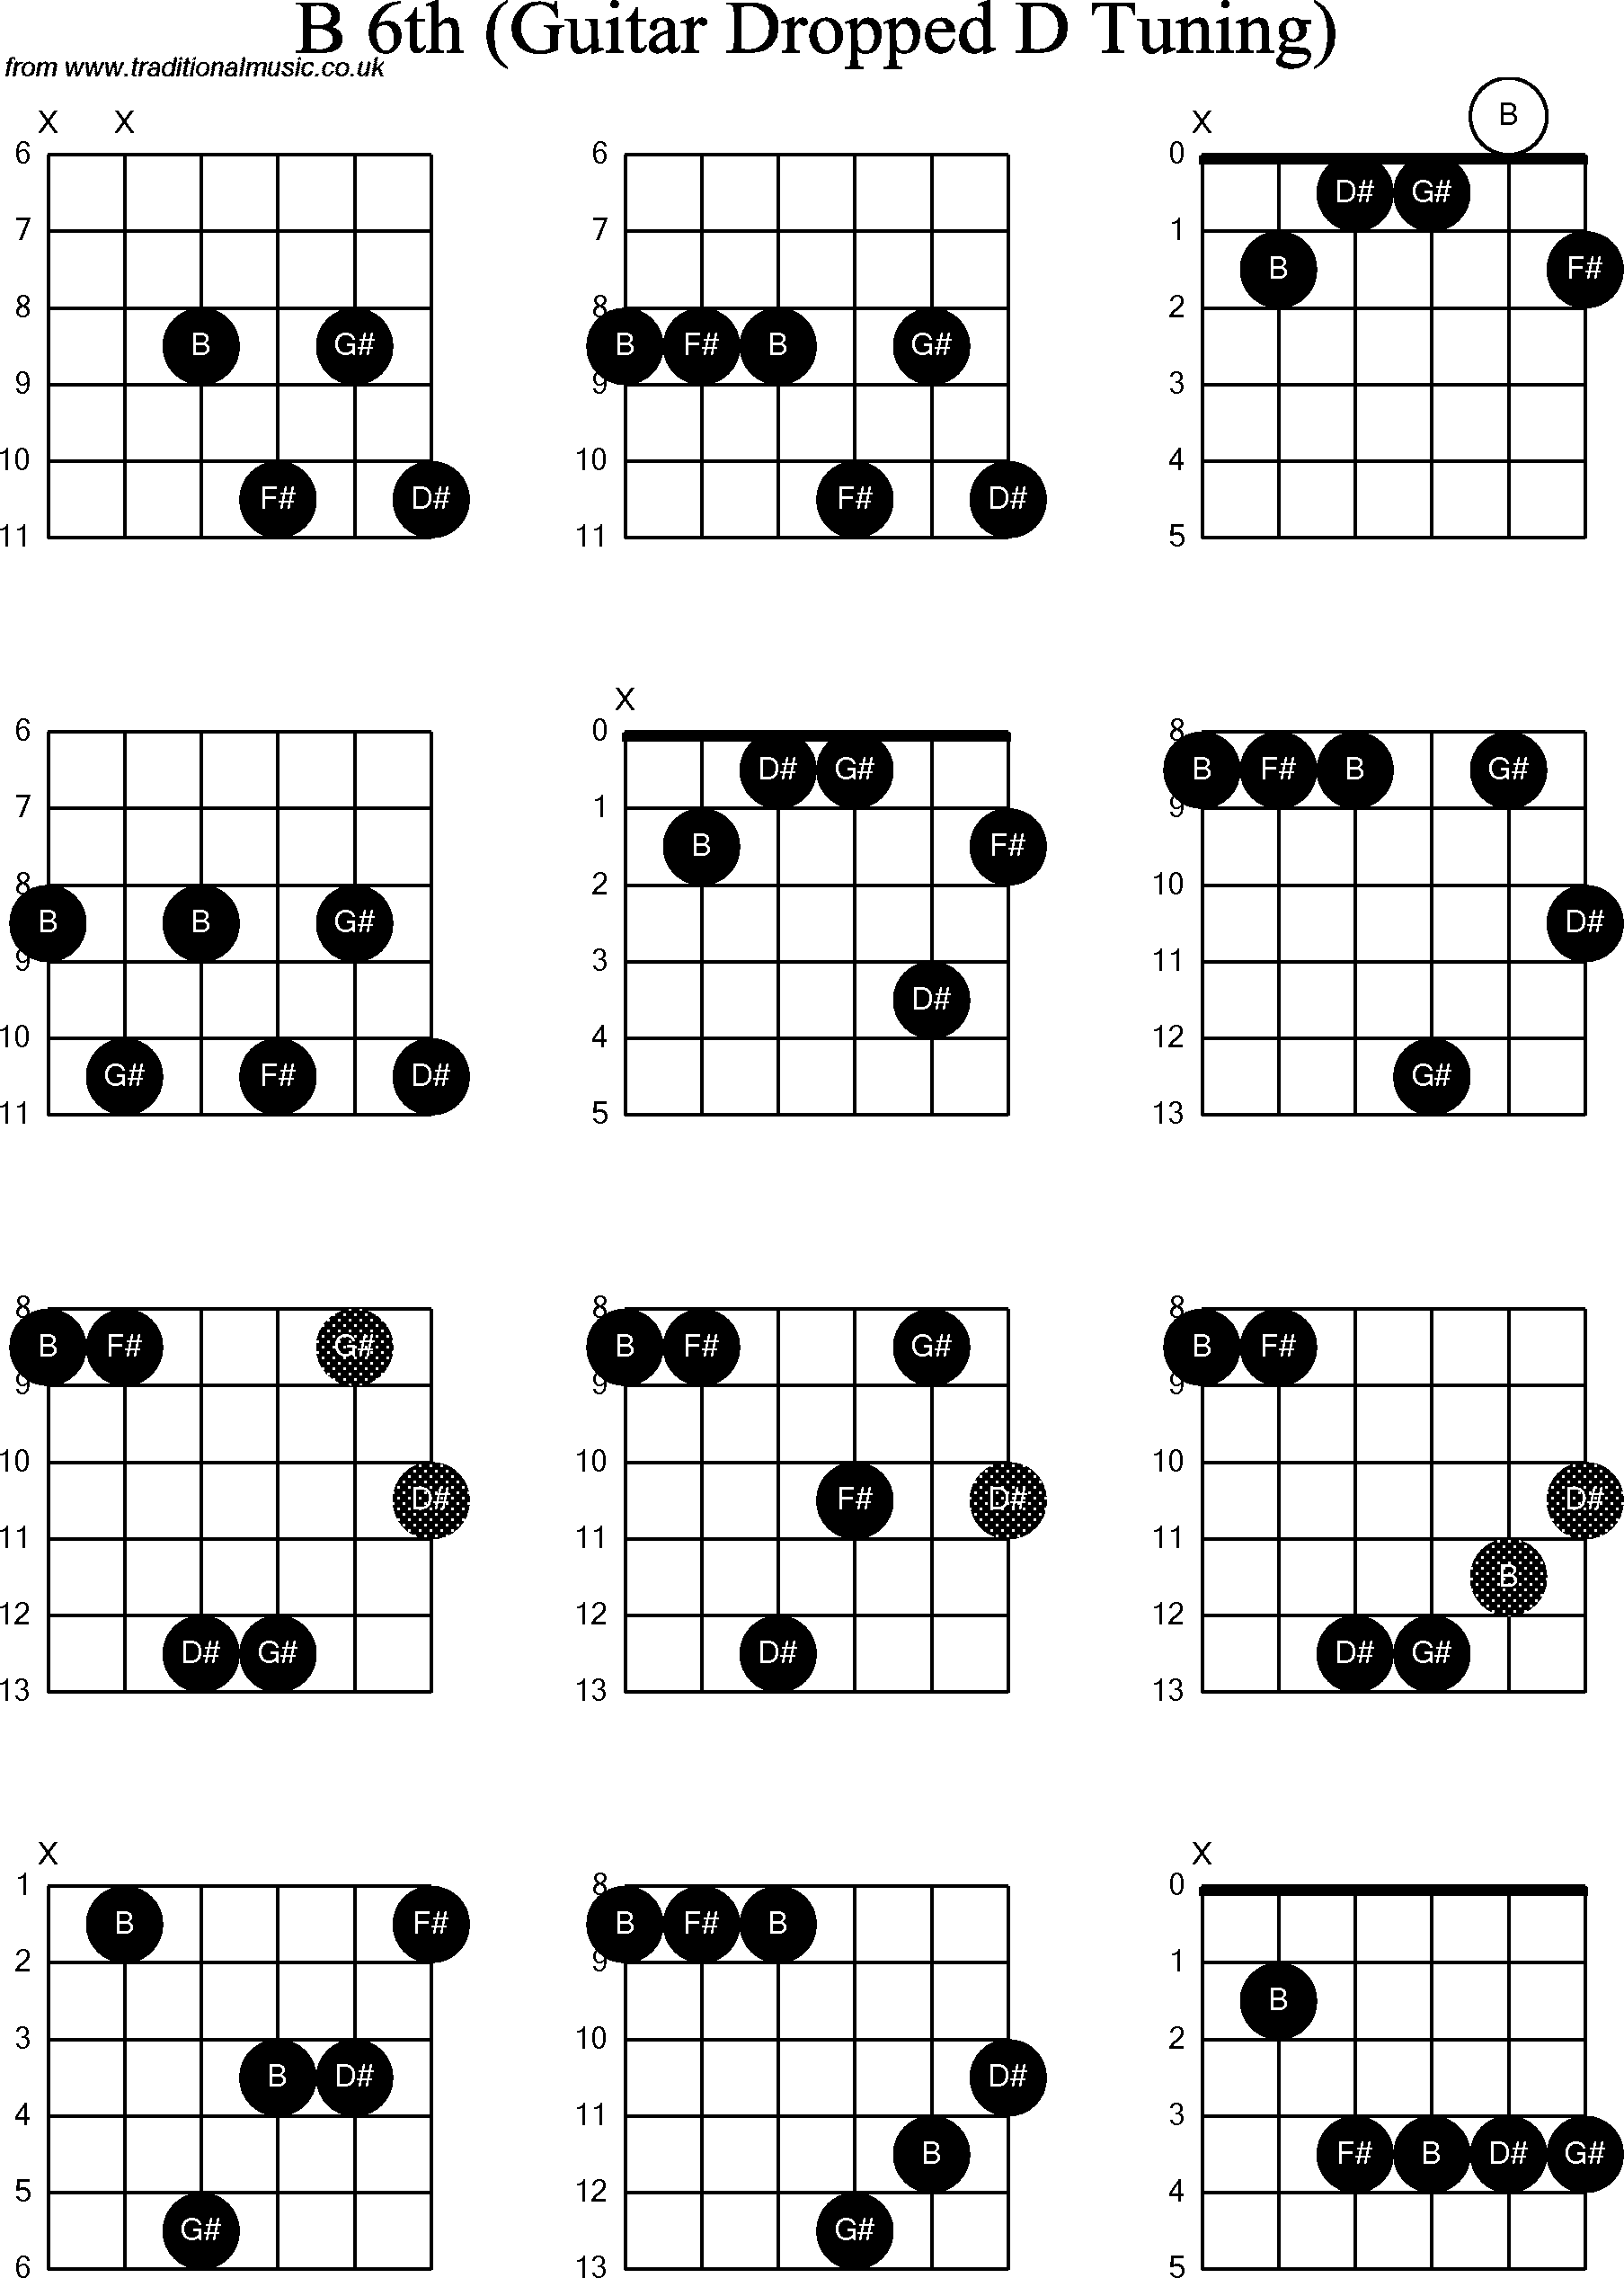 Chord diagrams for dropped D Guitar(DADGBE), B6th